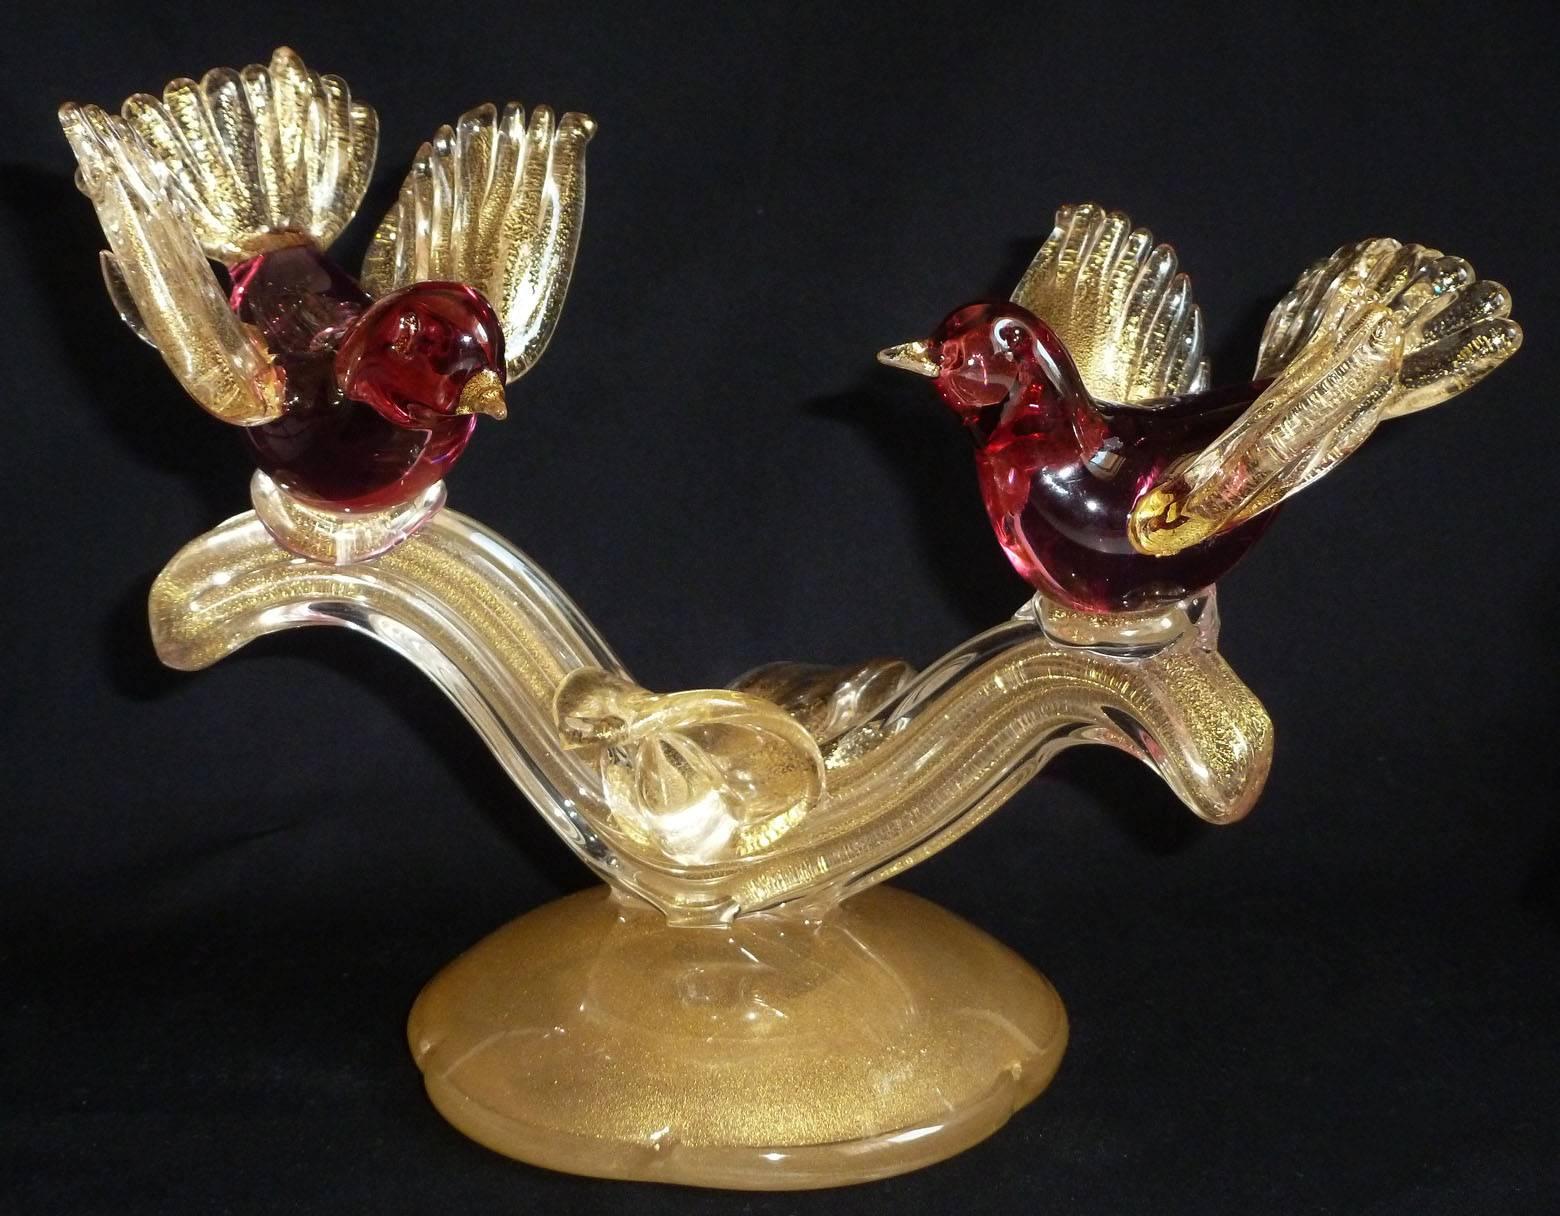 Beautiful Murano handblown cranberry pink and gold flecks Italian art glass birds on branch sculpture. Documented as a Alfredo Barbini piece, circa 1950s, and published in his Weil Ceramics and Glass catalog. Profusely covered in gold leaf